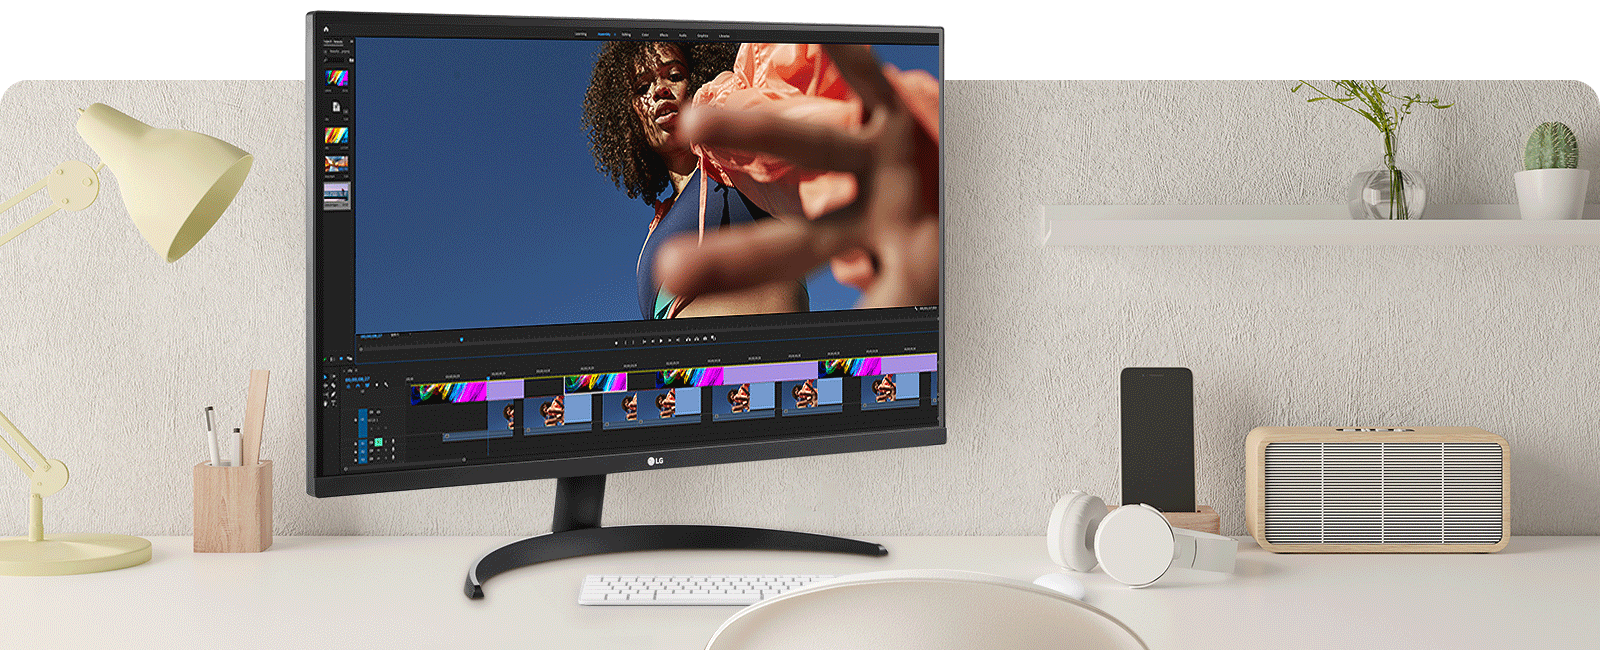 Experience stunning visual clarity and vibrant colors with the LG UHD 4K HDR monitor.